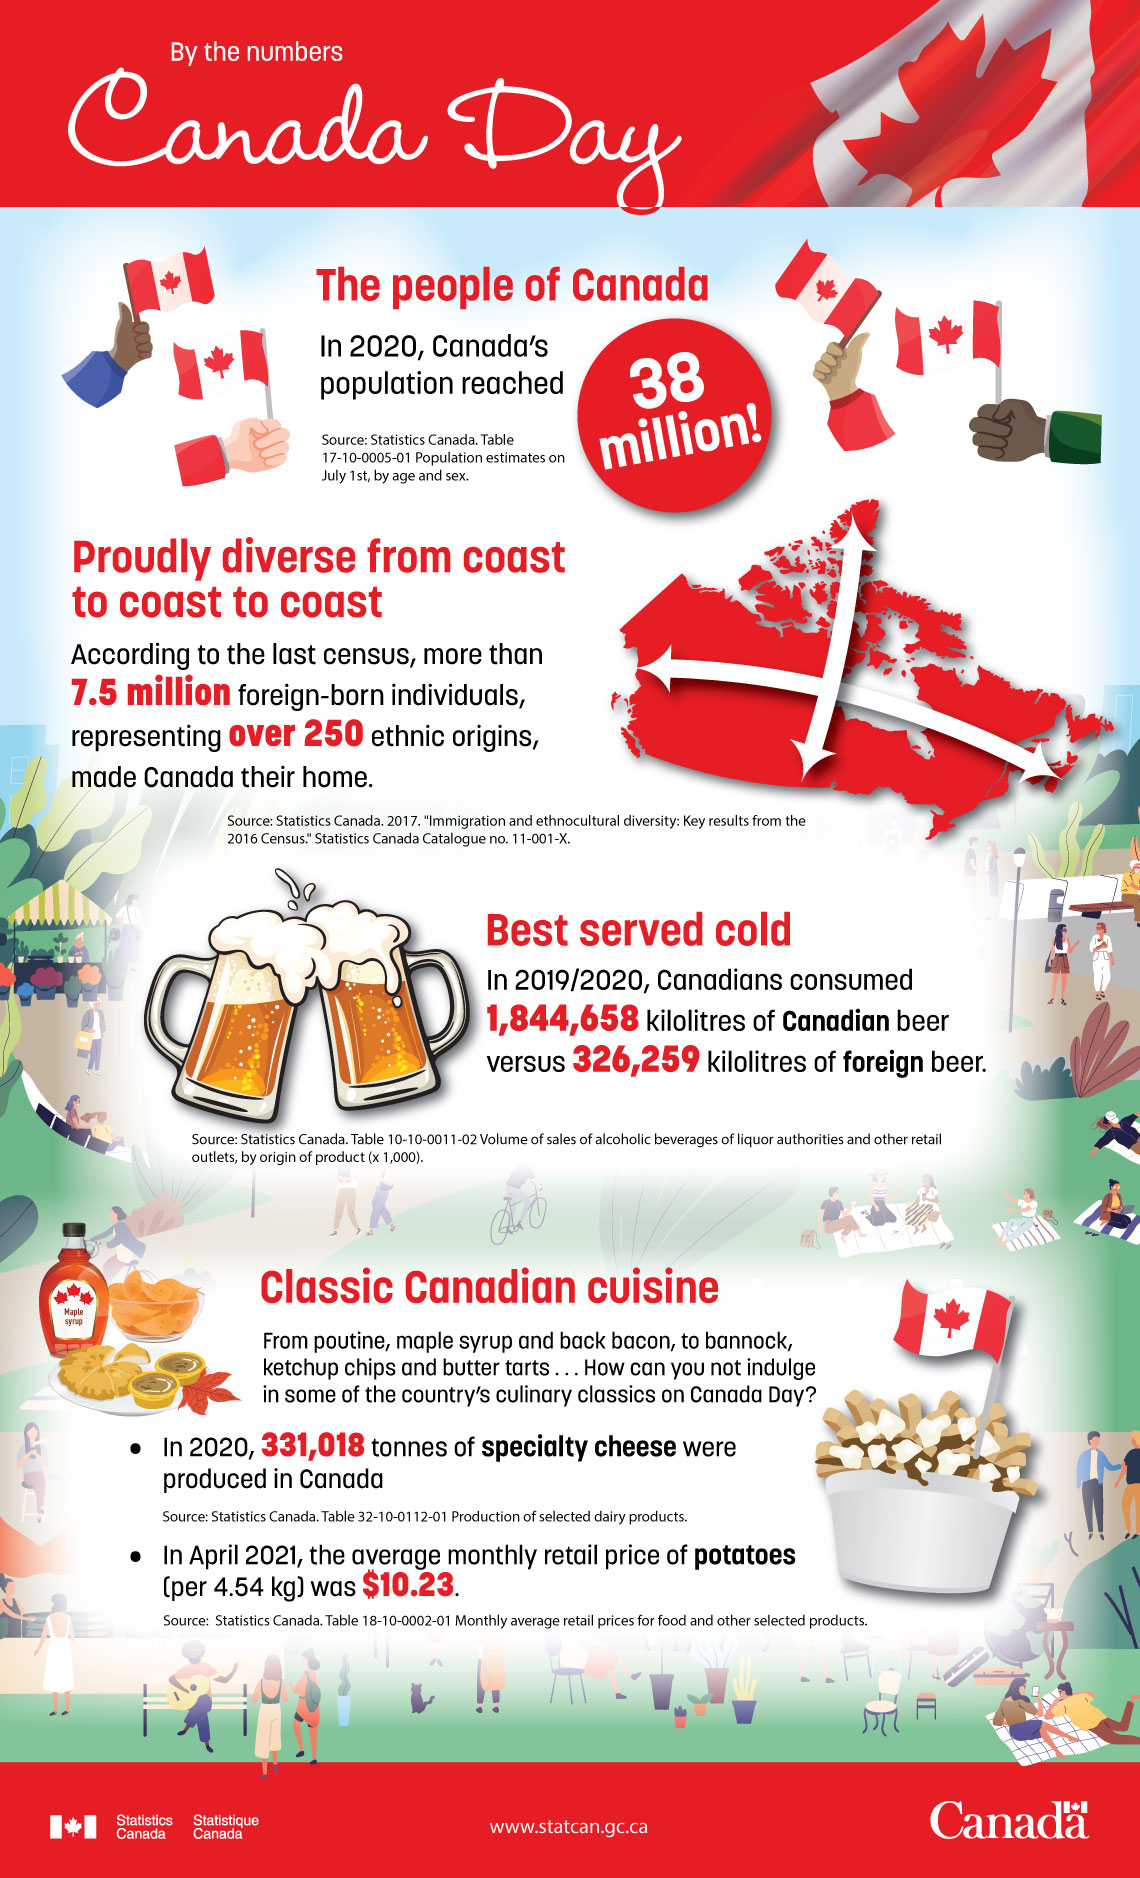 By the numbers: Canada Day